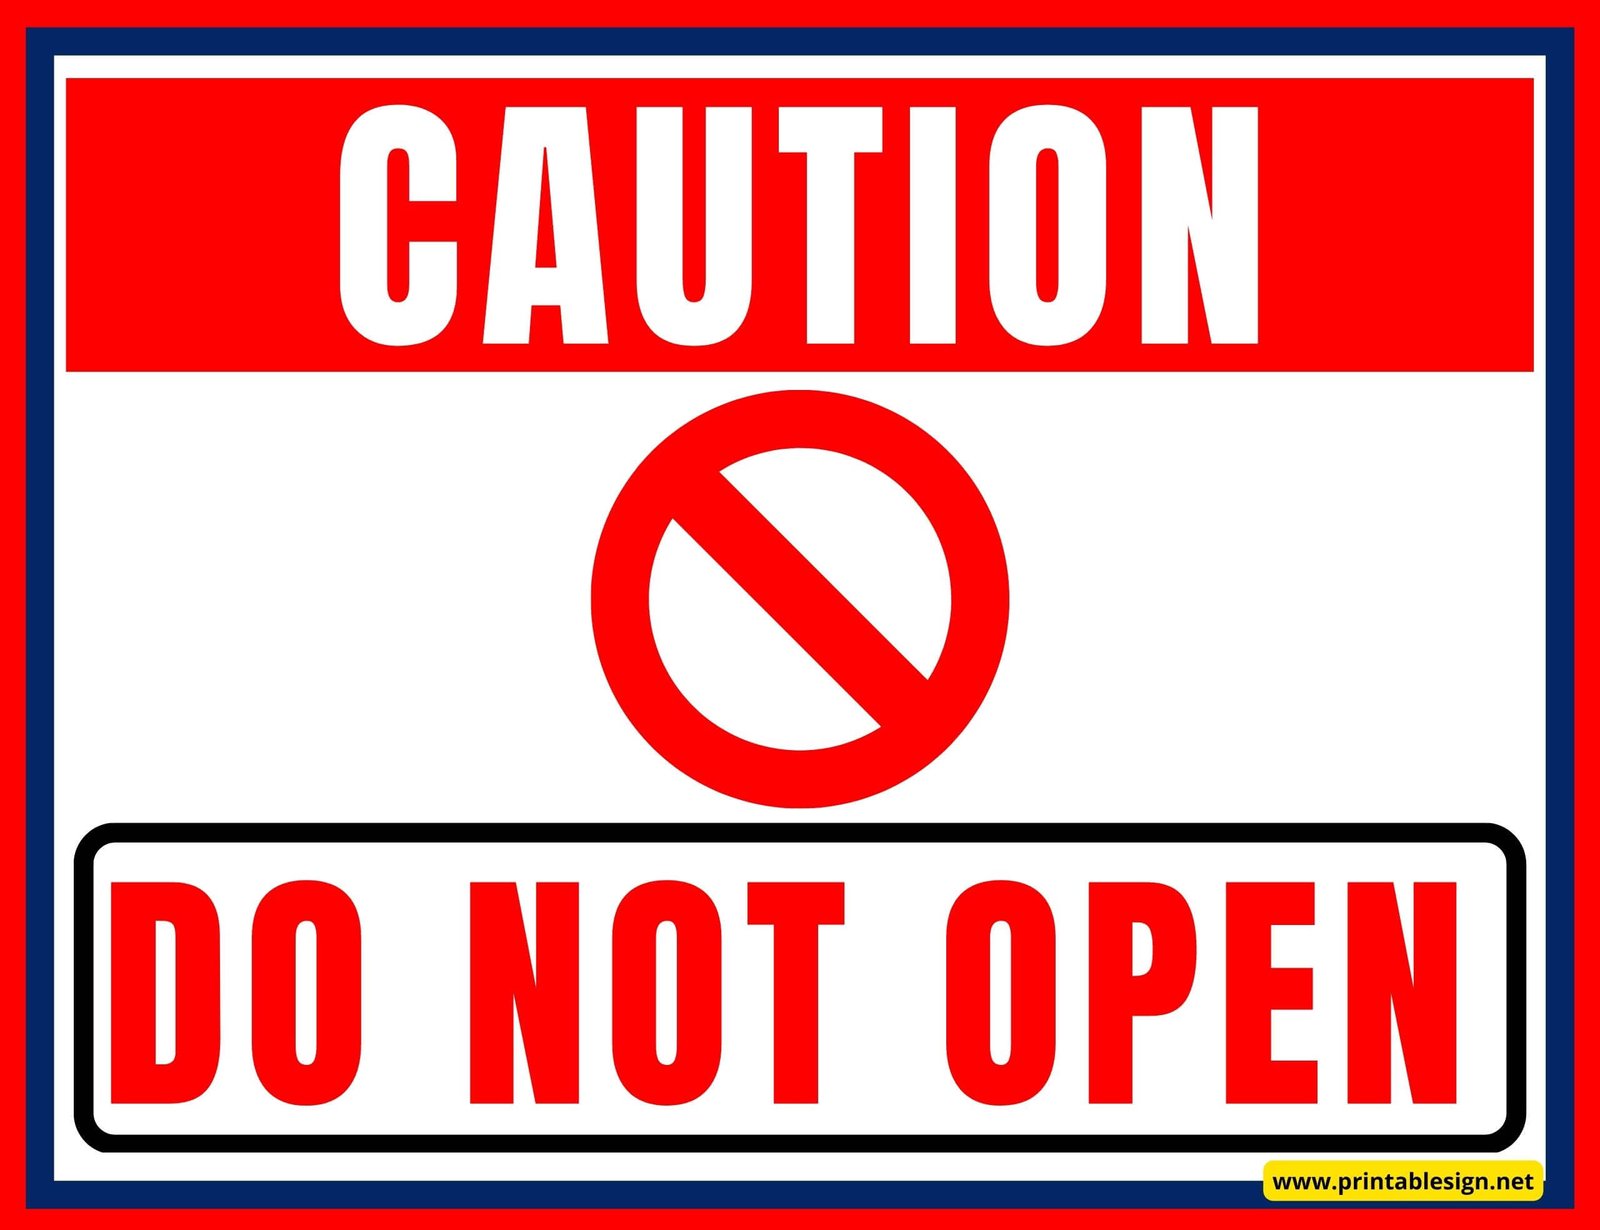 mr-safe-do-not-open-sign-pvc-sticker-a4-8-25-inch-x-11-7-inch-amazon-in-office-products